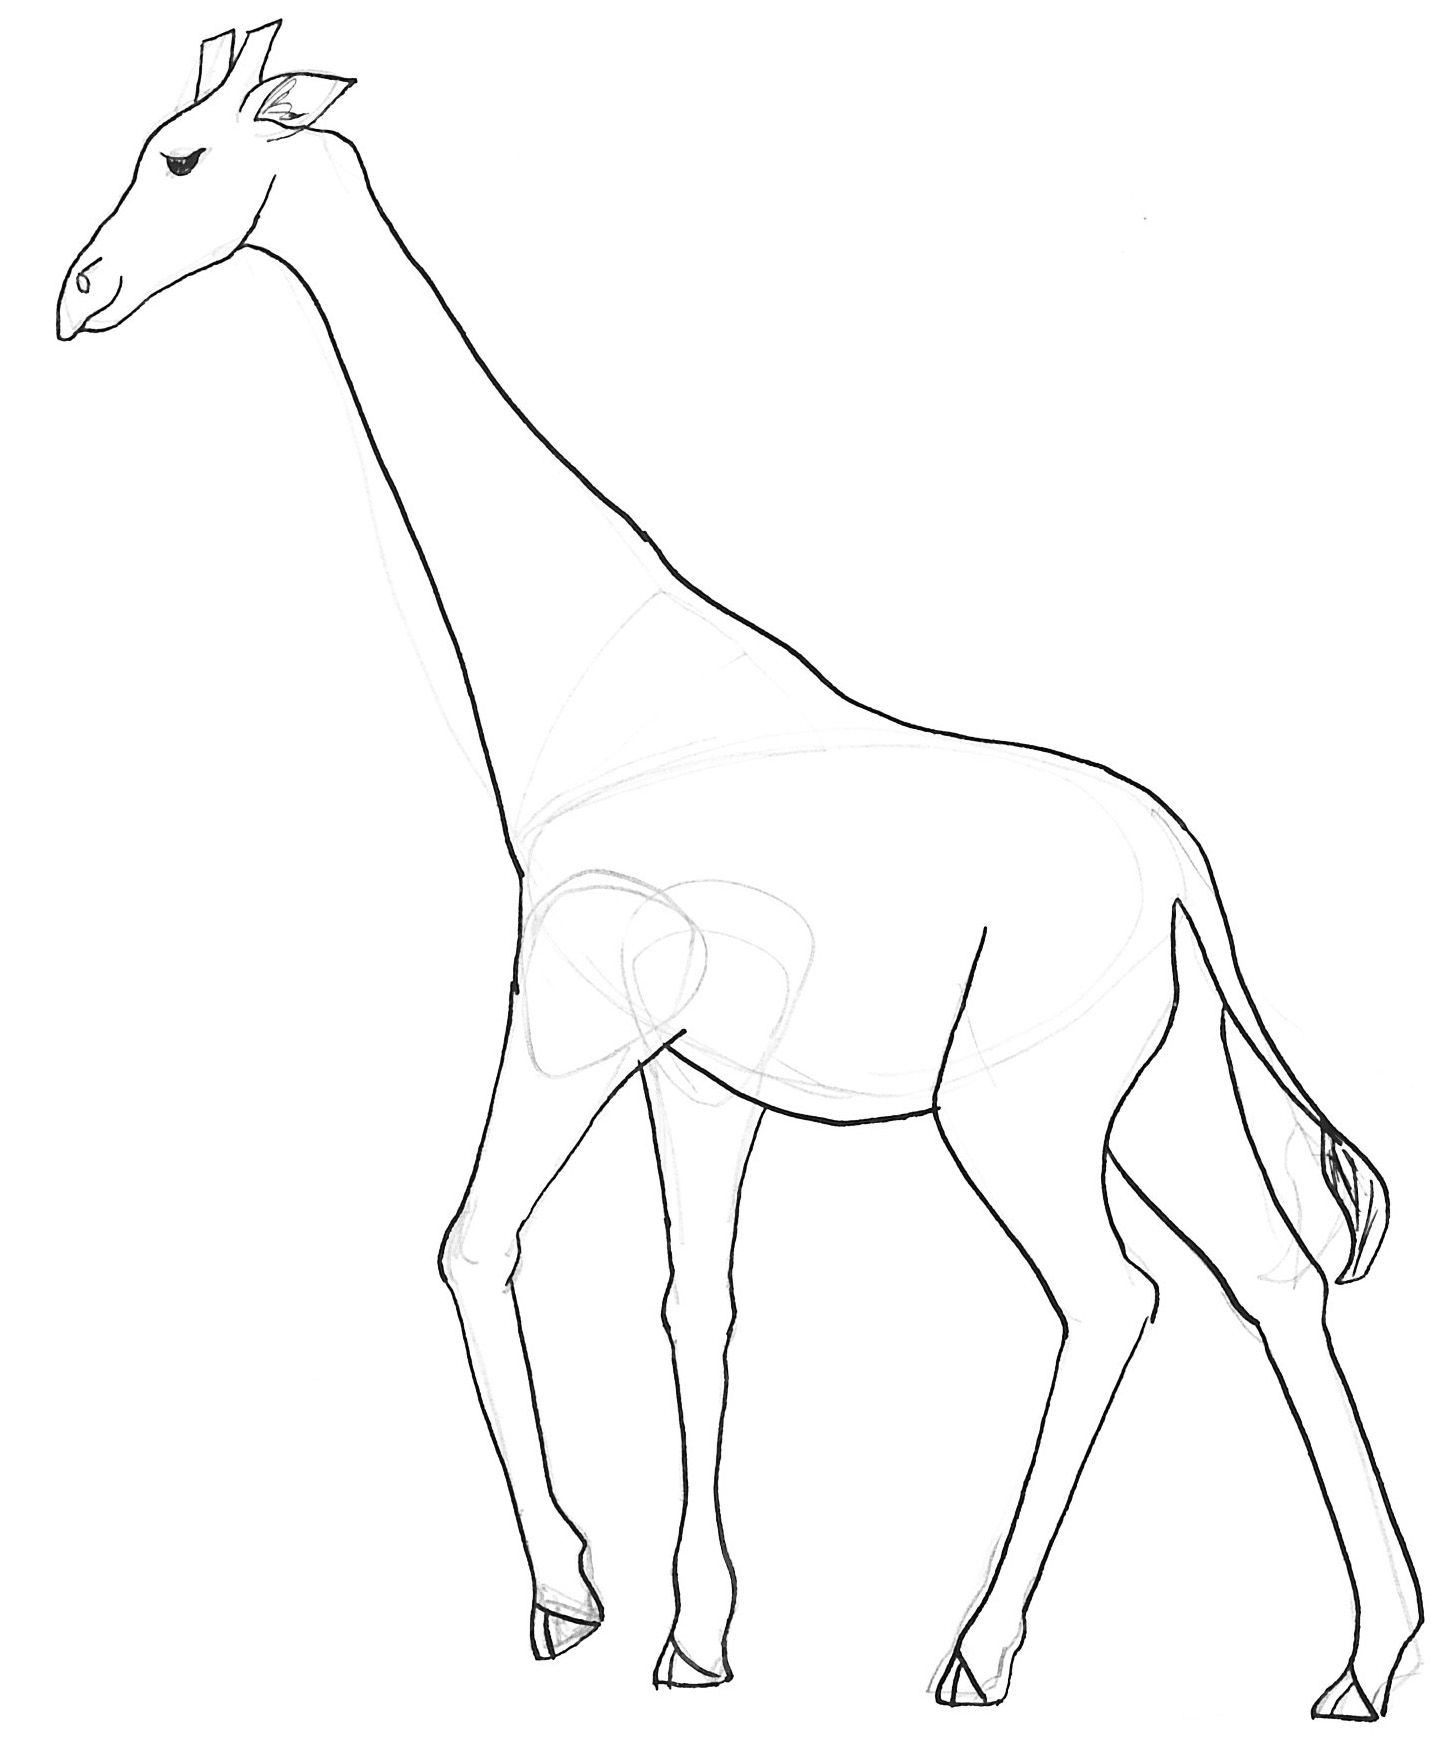 How To Draw a Giraffe - EASY Drawing Tutorial!